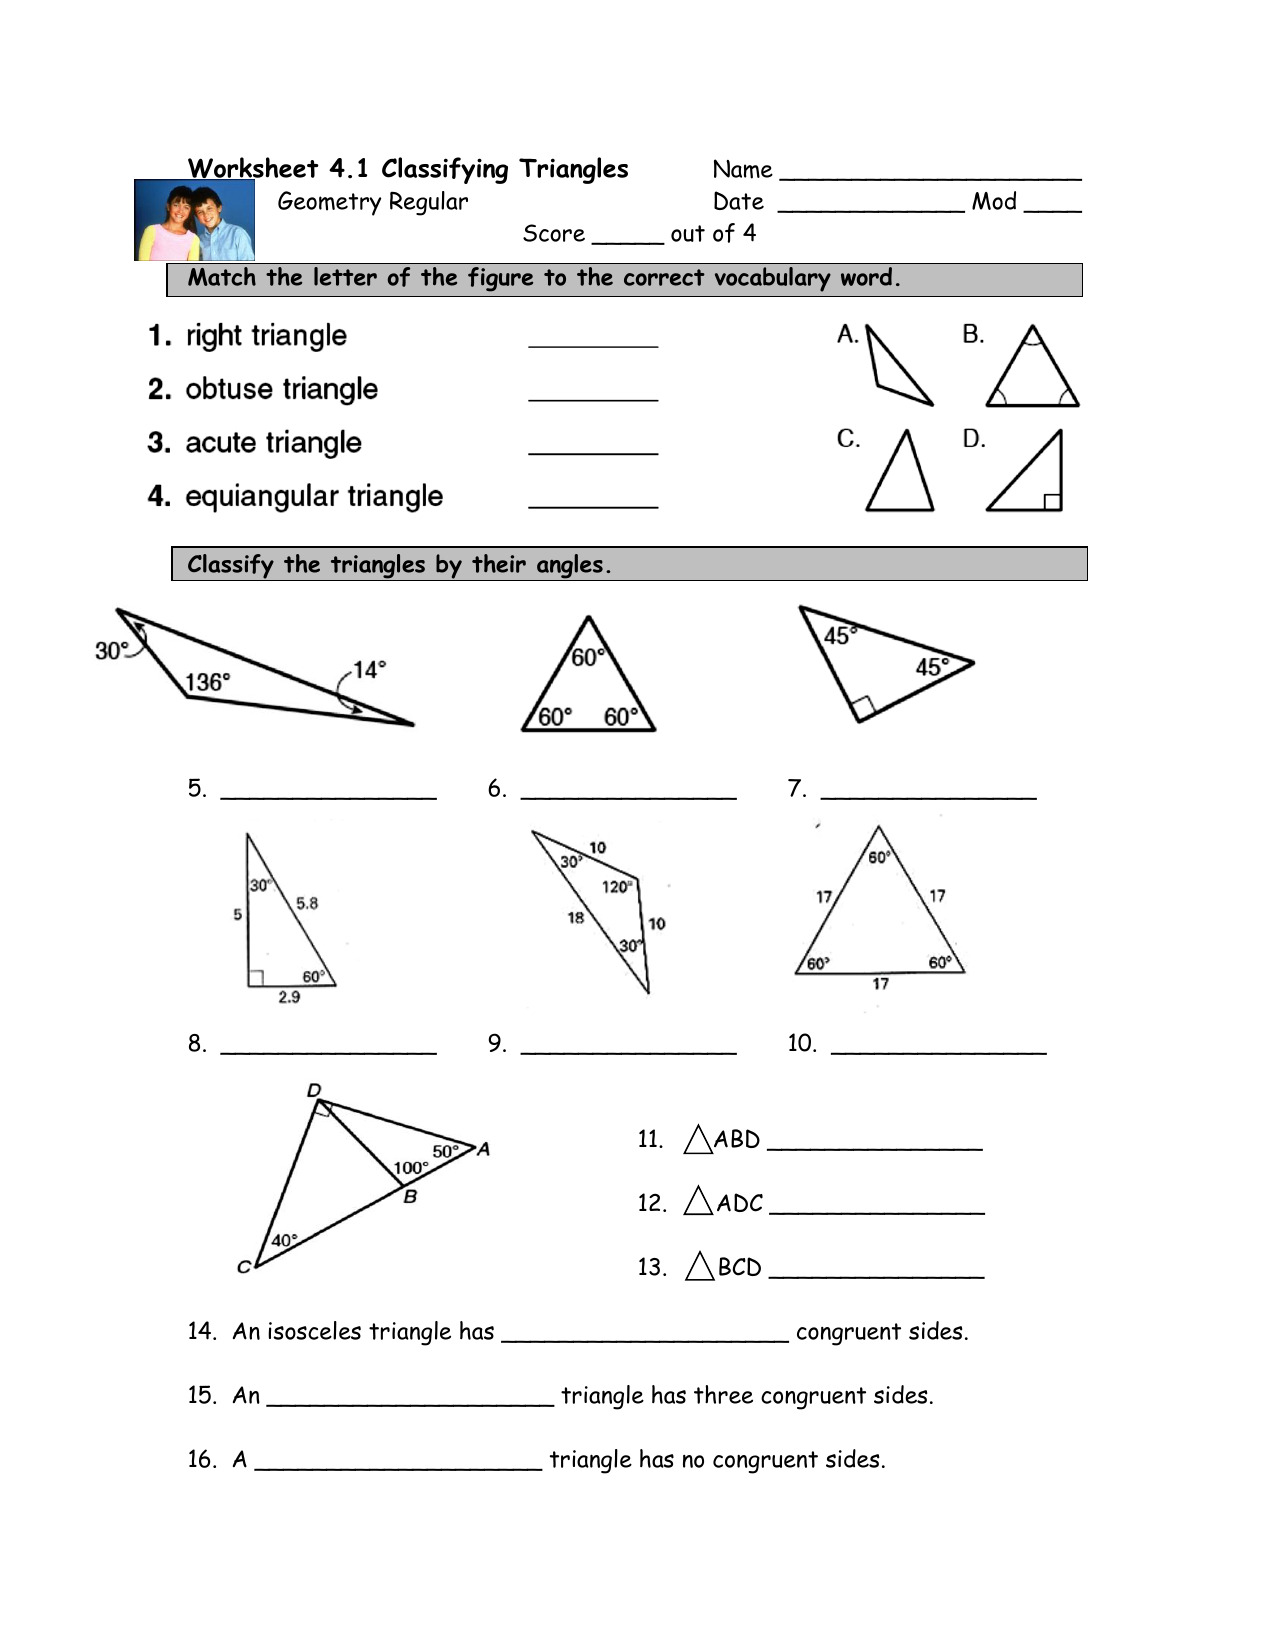 Worksheet 41 Classifying Triangles